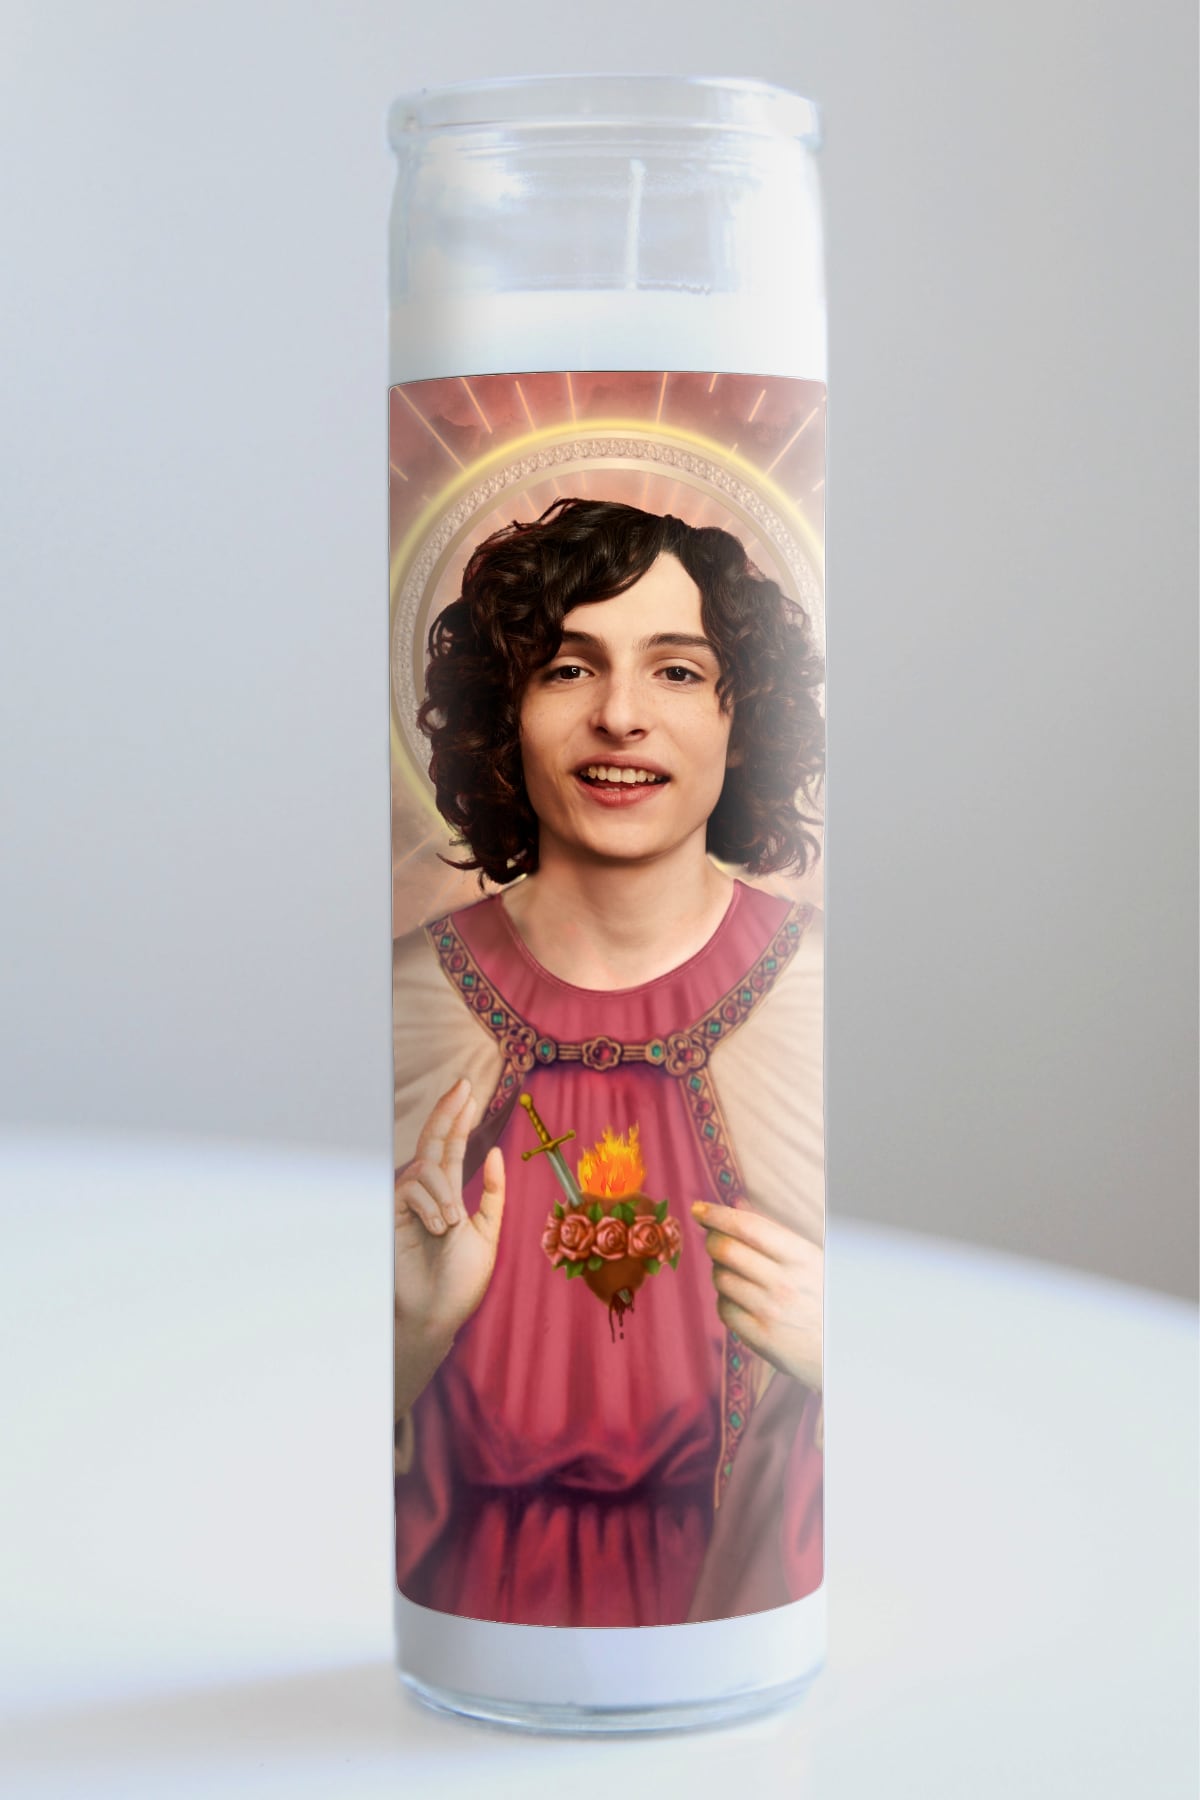 Mike (Stranger Things) Red Saint Candle